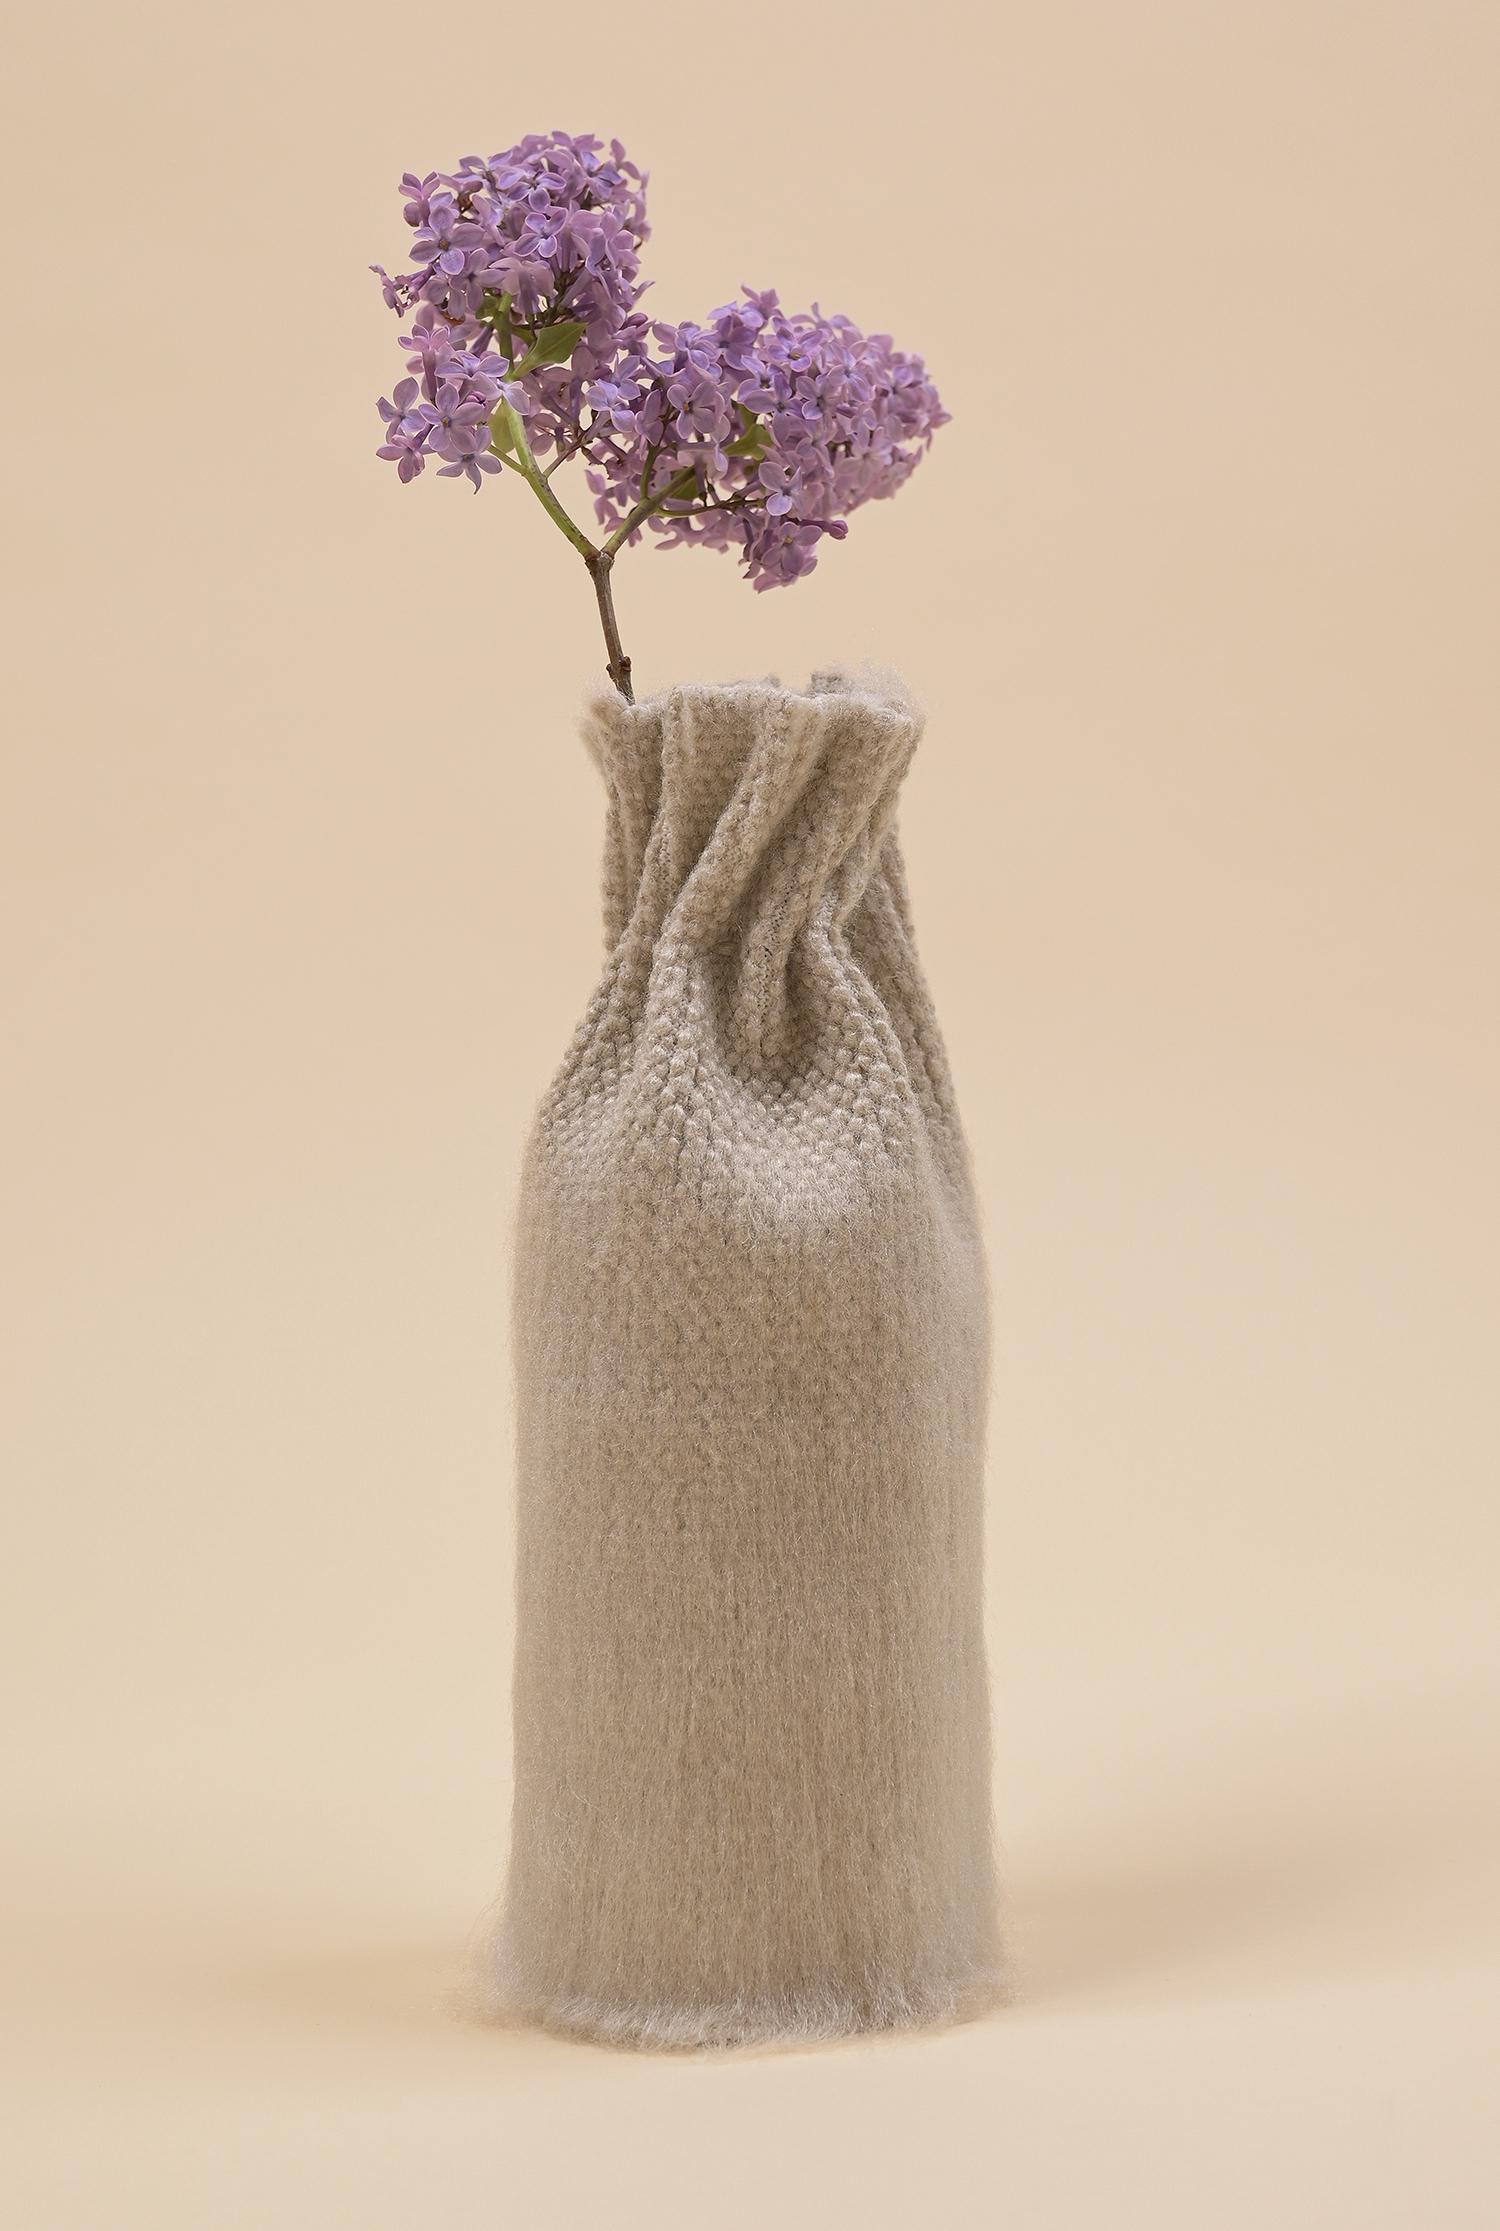 This product belongs to our Collection N°2 - a collection that explores the delicate process of blending in from a social point of view.

This vase (highball glass cover) is knitted as a flat textile with engineered holes. When threaded and pulled